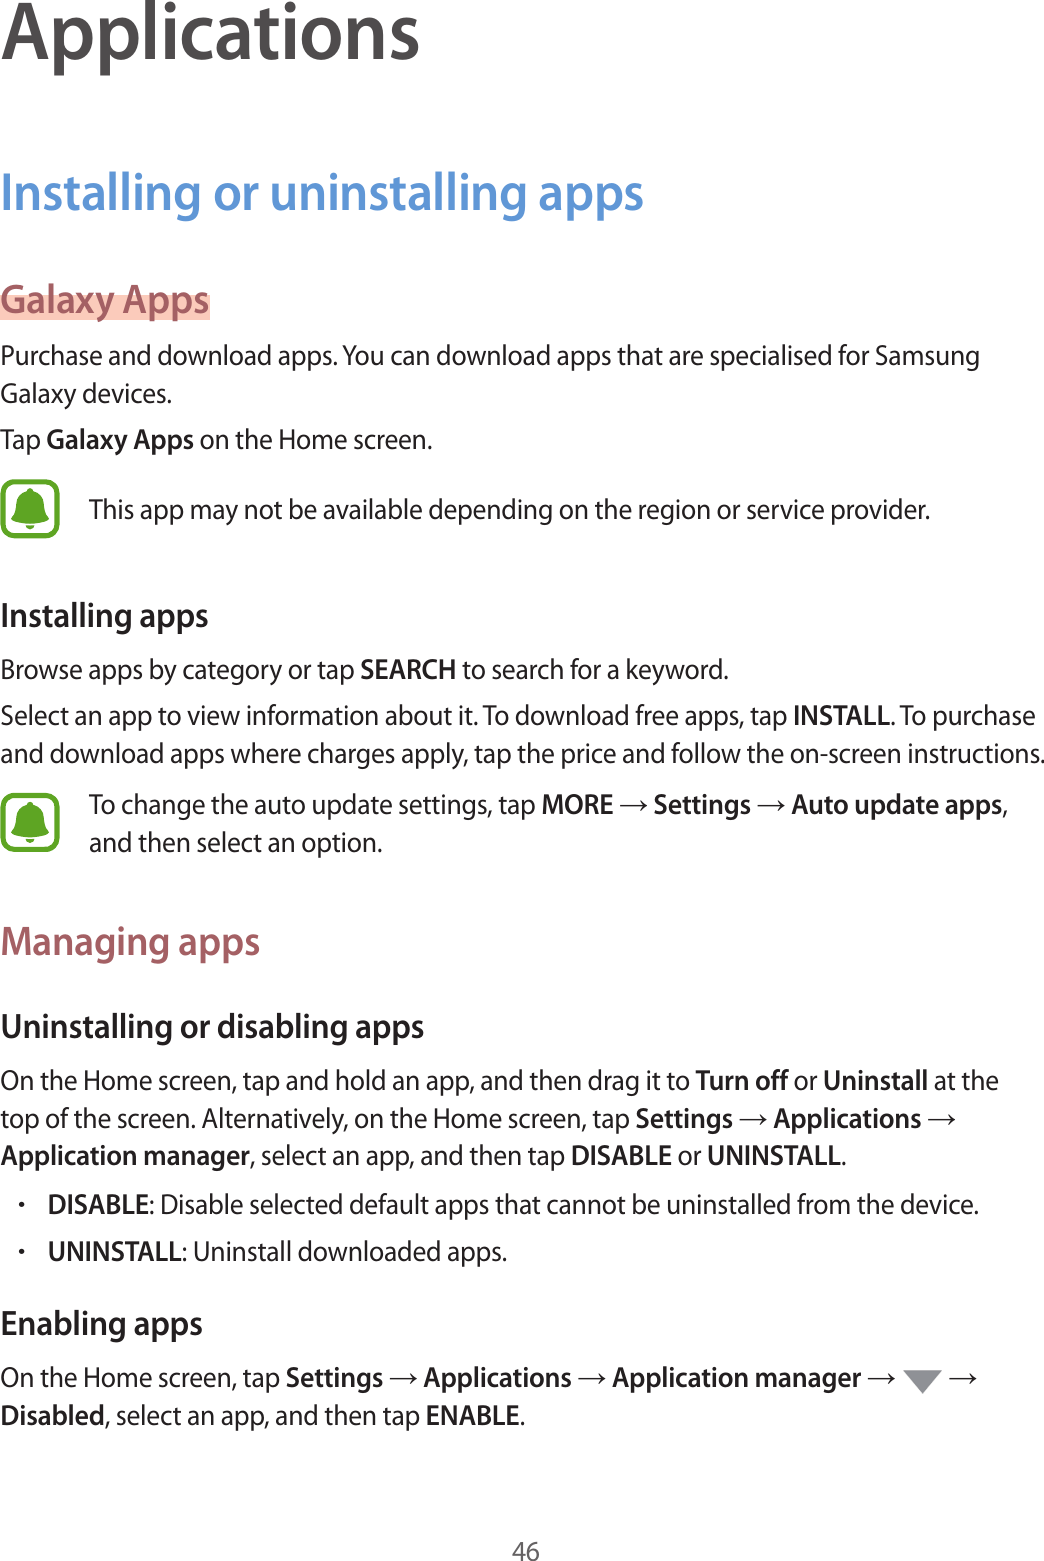 46ApplicationsInstalling or uninstalling appsGalaxy AppsPurchase and download apps. You can download apps that are specialised for Samsung Galaxy devices.Tap Galaxy Apps on the Home screen.This app may not be available depending on the region or service provider.Installing appsBrowse apps by category or tap SEARCH to search for a keyword.Select an app to view information about it. To download free apps, tap INSTALL. To purchase and download apps where charges apply, tap the price and follow the on-screen instructions.To change the auto update settings, tap MORE → Settings → Auto update apps, and then select an option.Managing appsUninstalling or disabling appsOn the Home screen, tap and hold an app, and then drag it to Turn off or Uninstall at the top of the screen. Alternatively, on the Home screen, tap Settings → Applications → Application manager, select an app, and then tap DISABLE or UNINSTALL.•DISABLE: Disable selected default apps that cannot be uninstalled from the device.•UNINSTALL: Uninstall downloaded apps.Enabling appsOn the Home screen, tap Settings → Applications → Application manager →   → Disabled, select an app, and then tap ENABLE.